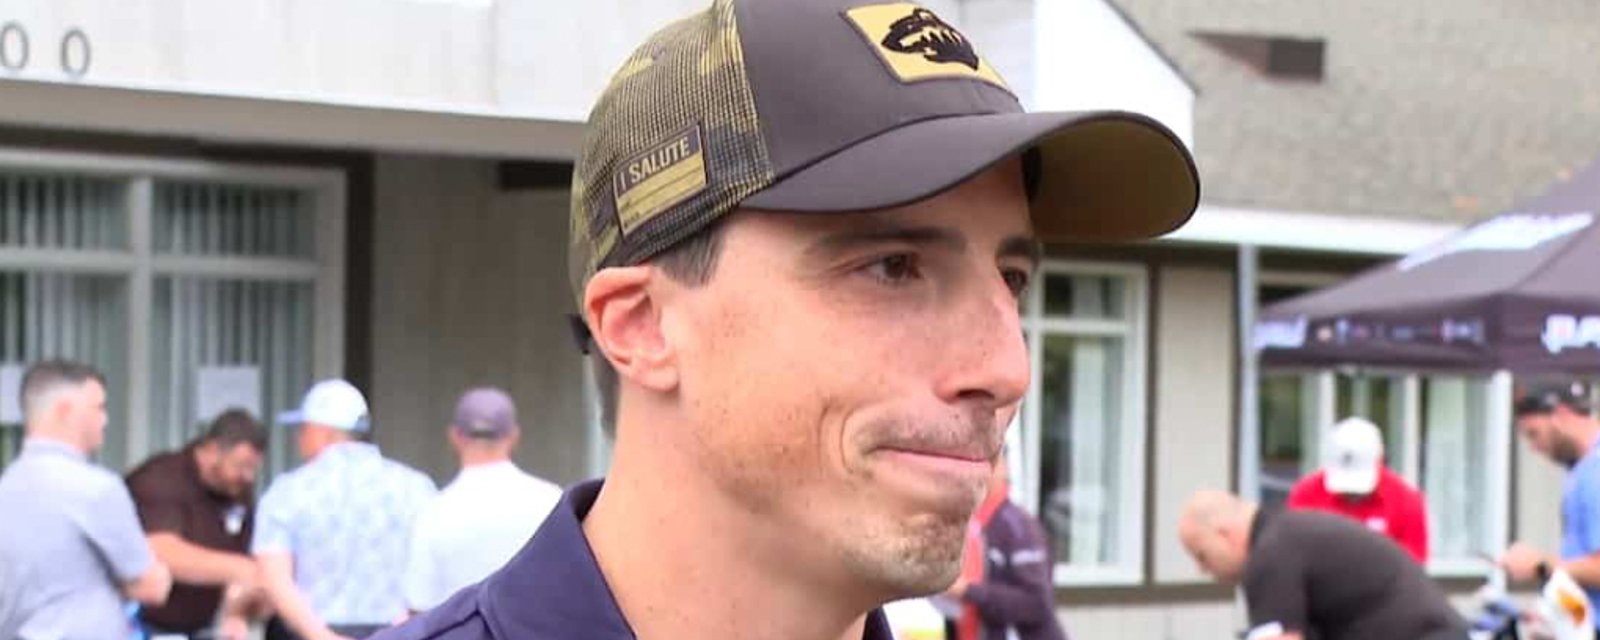 An emotional Marc-Andre Fleury sounds off on NHL future